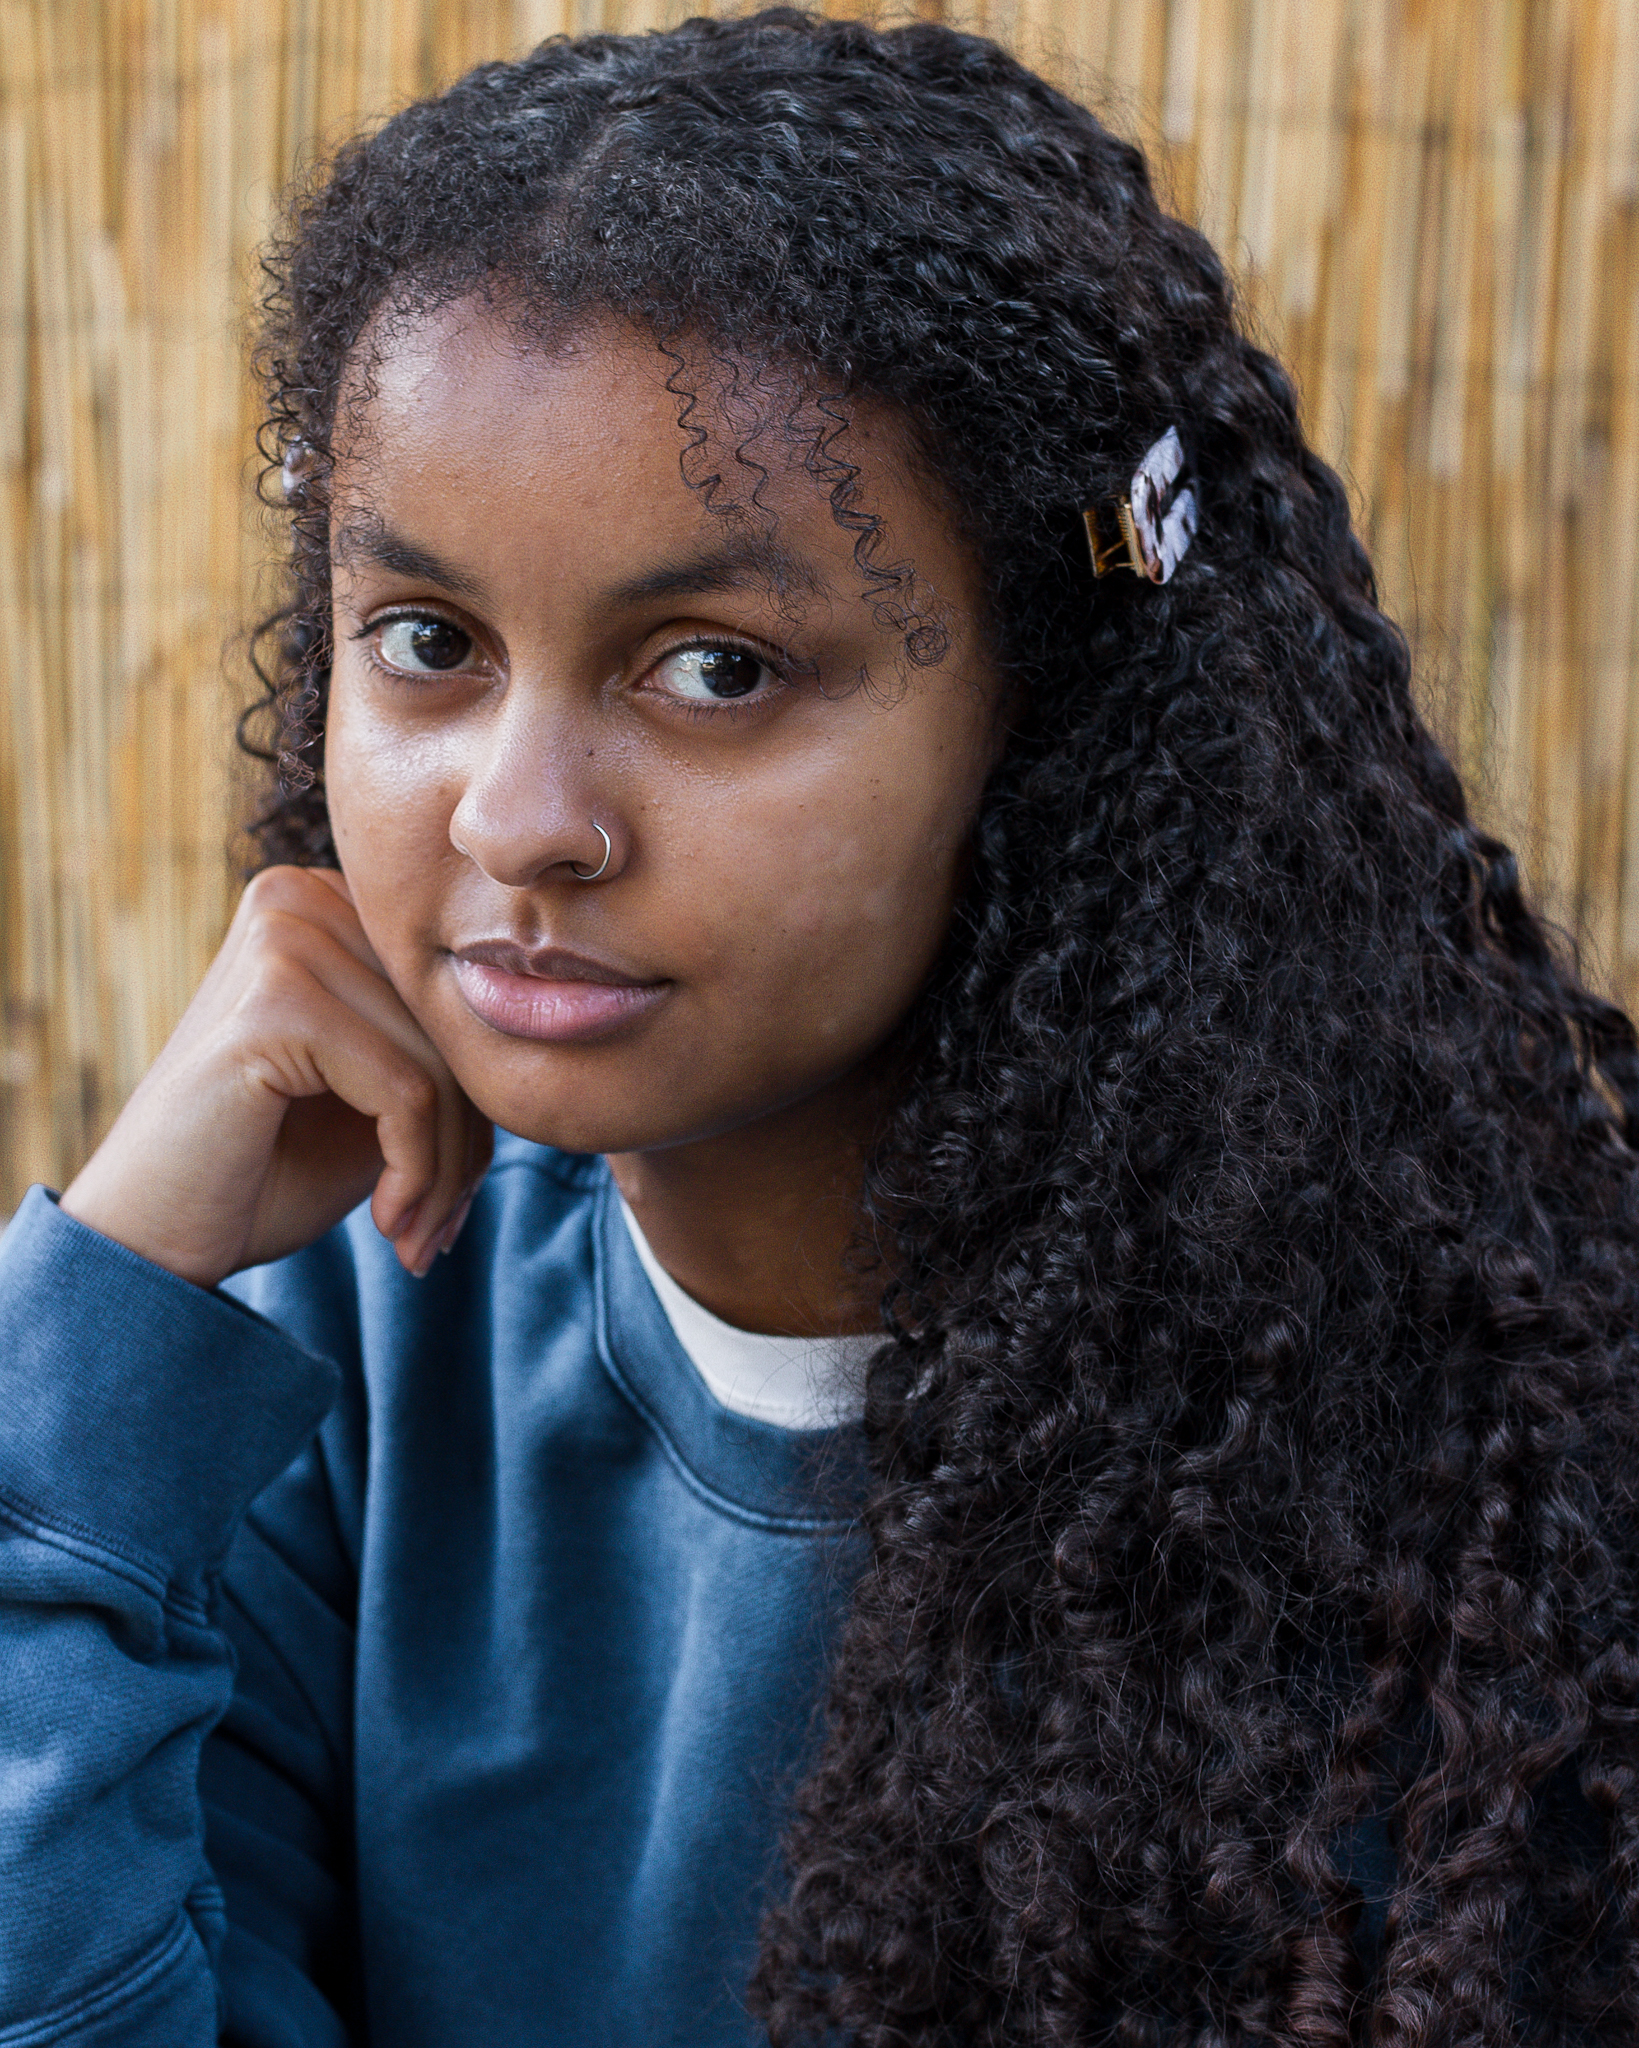 Headshot of Taneesha - a young black women with long, coiled hair, looking thoughtful with her head resting on her hand. She wears a blue jumper, and is in front of a straw background.